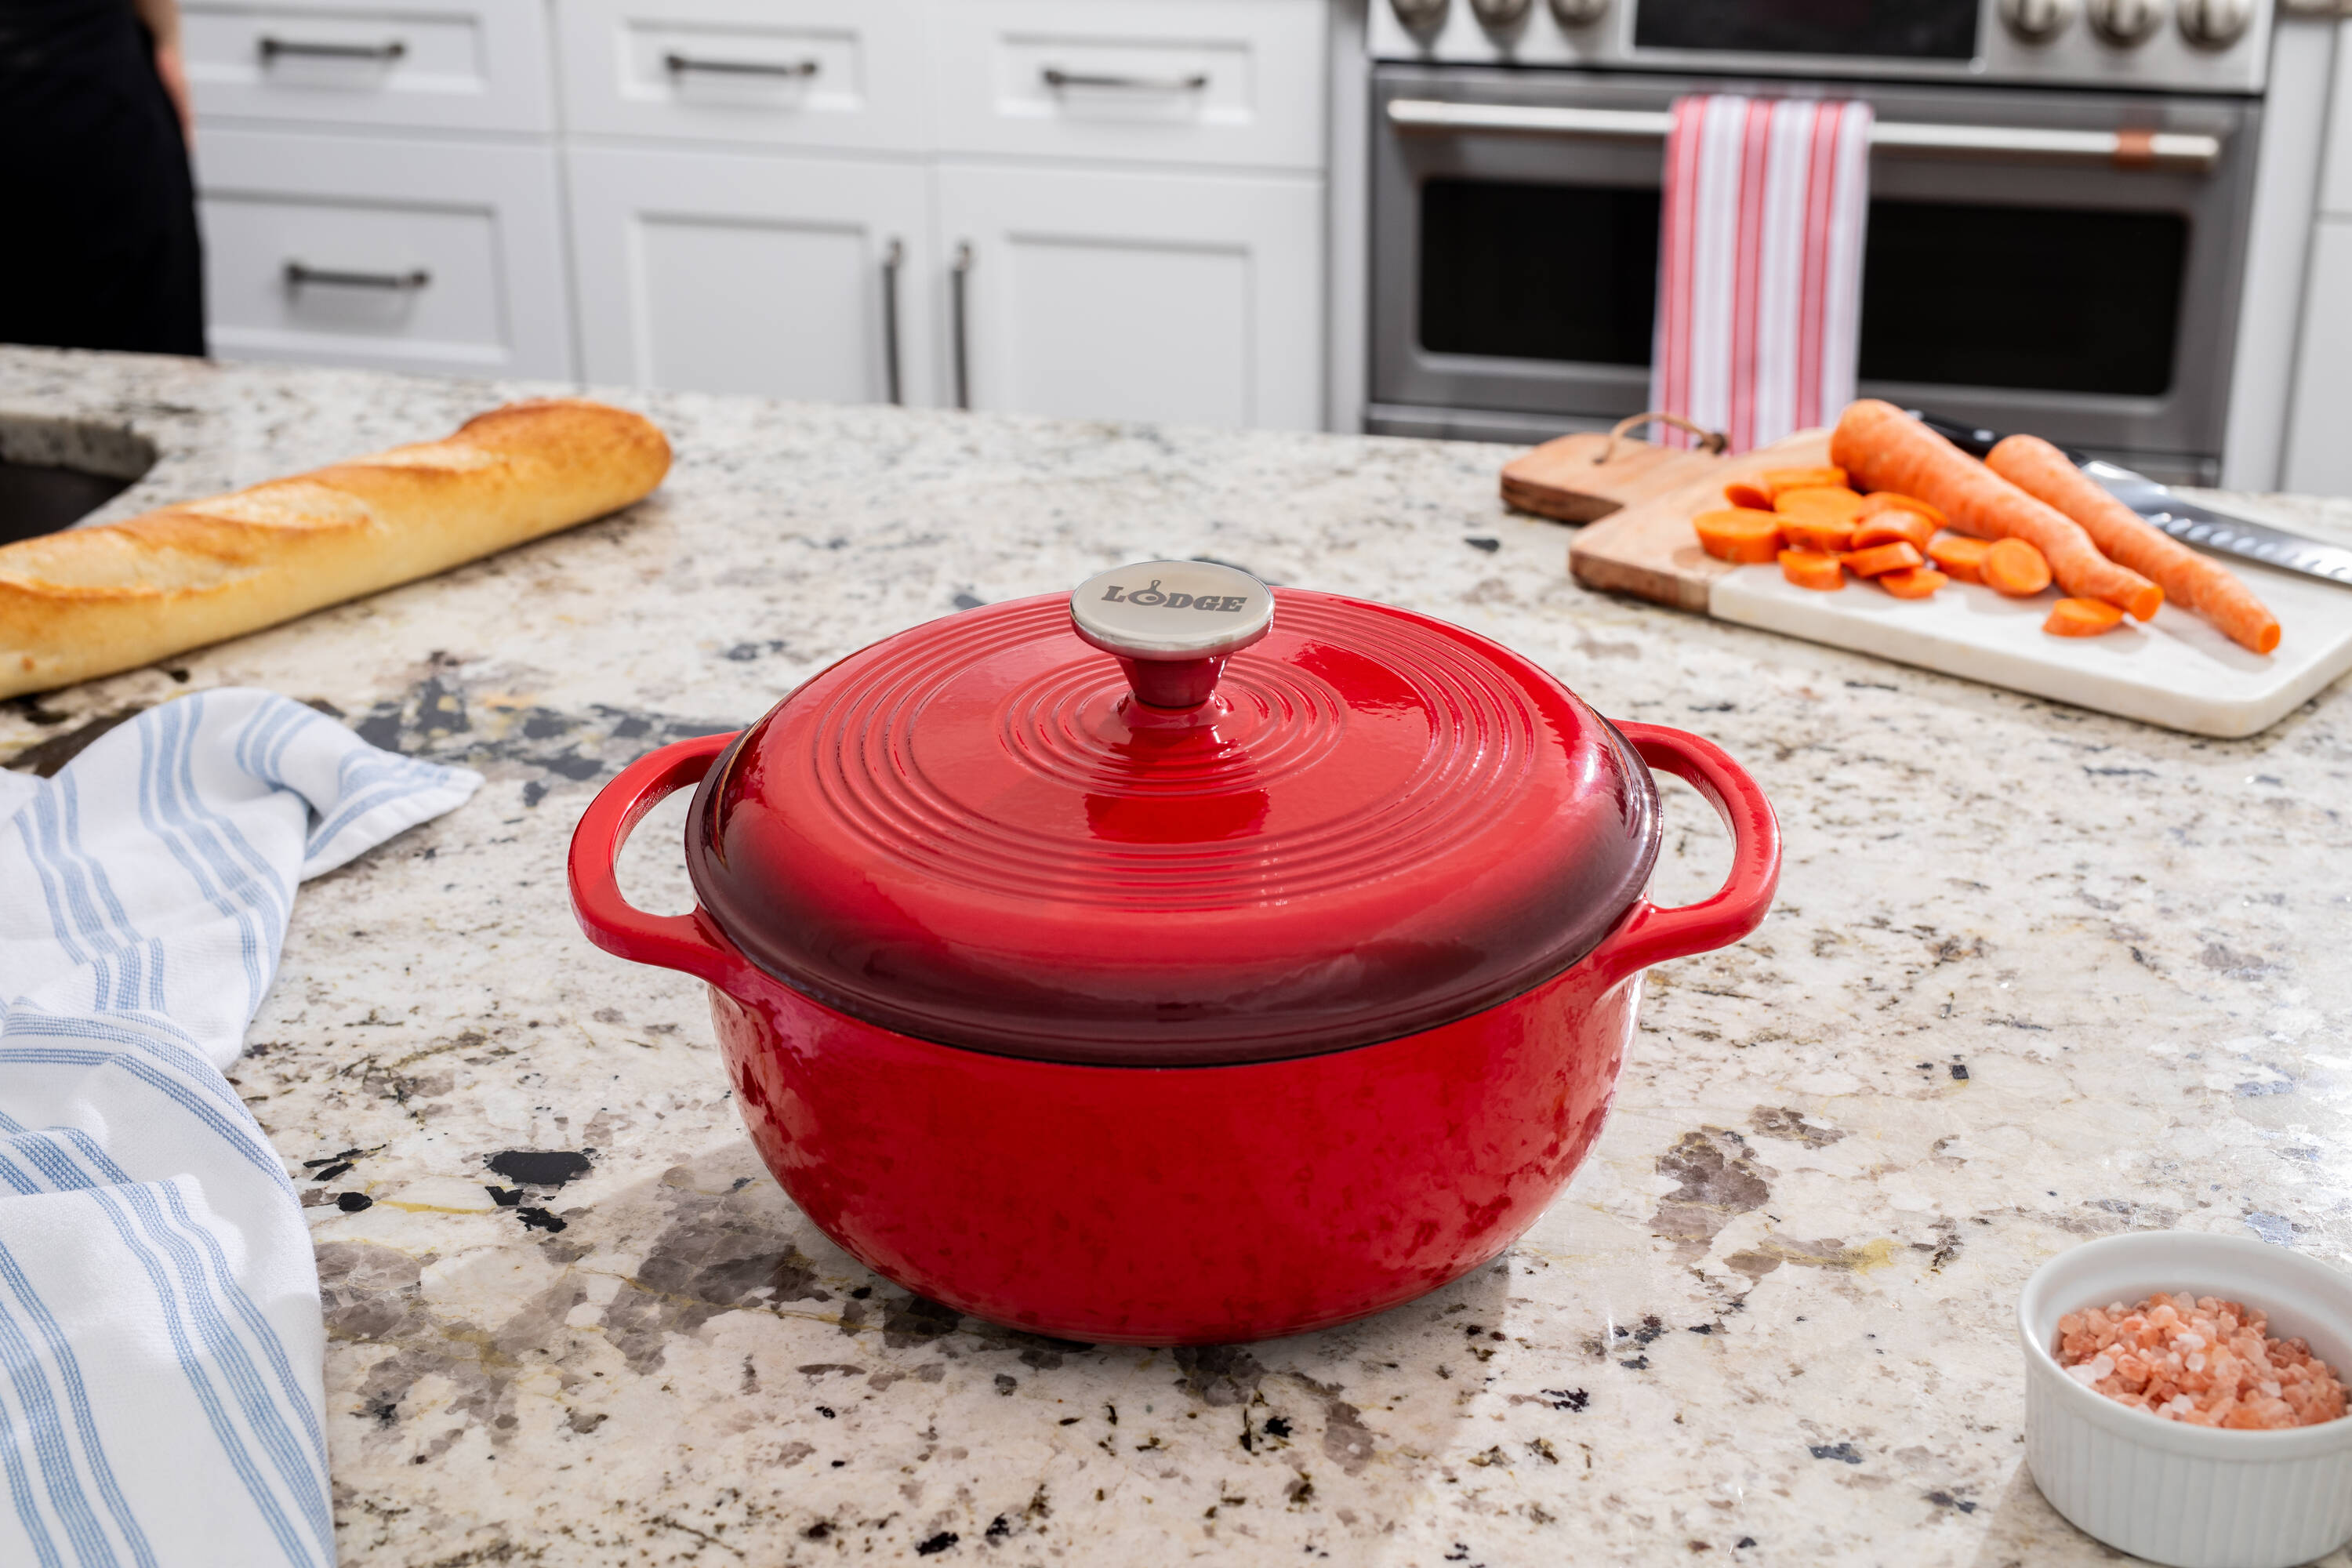 Lodge Cast Iron 4.5 Quart Enameled Dutch Oven in Red - Ideal for